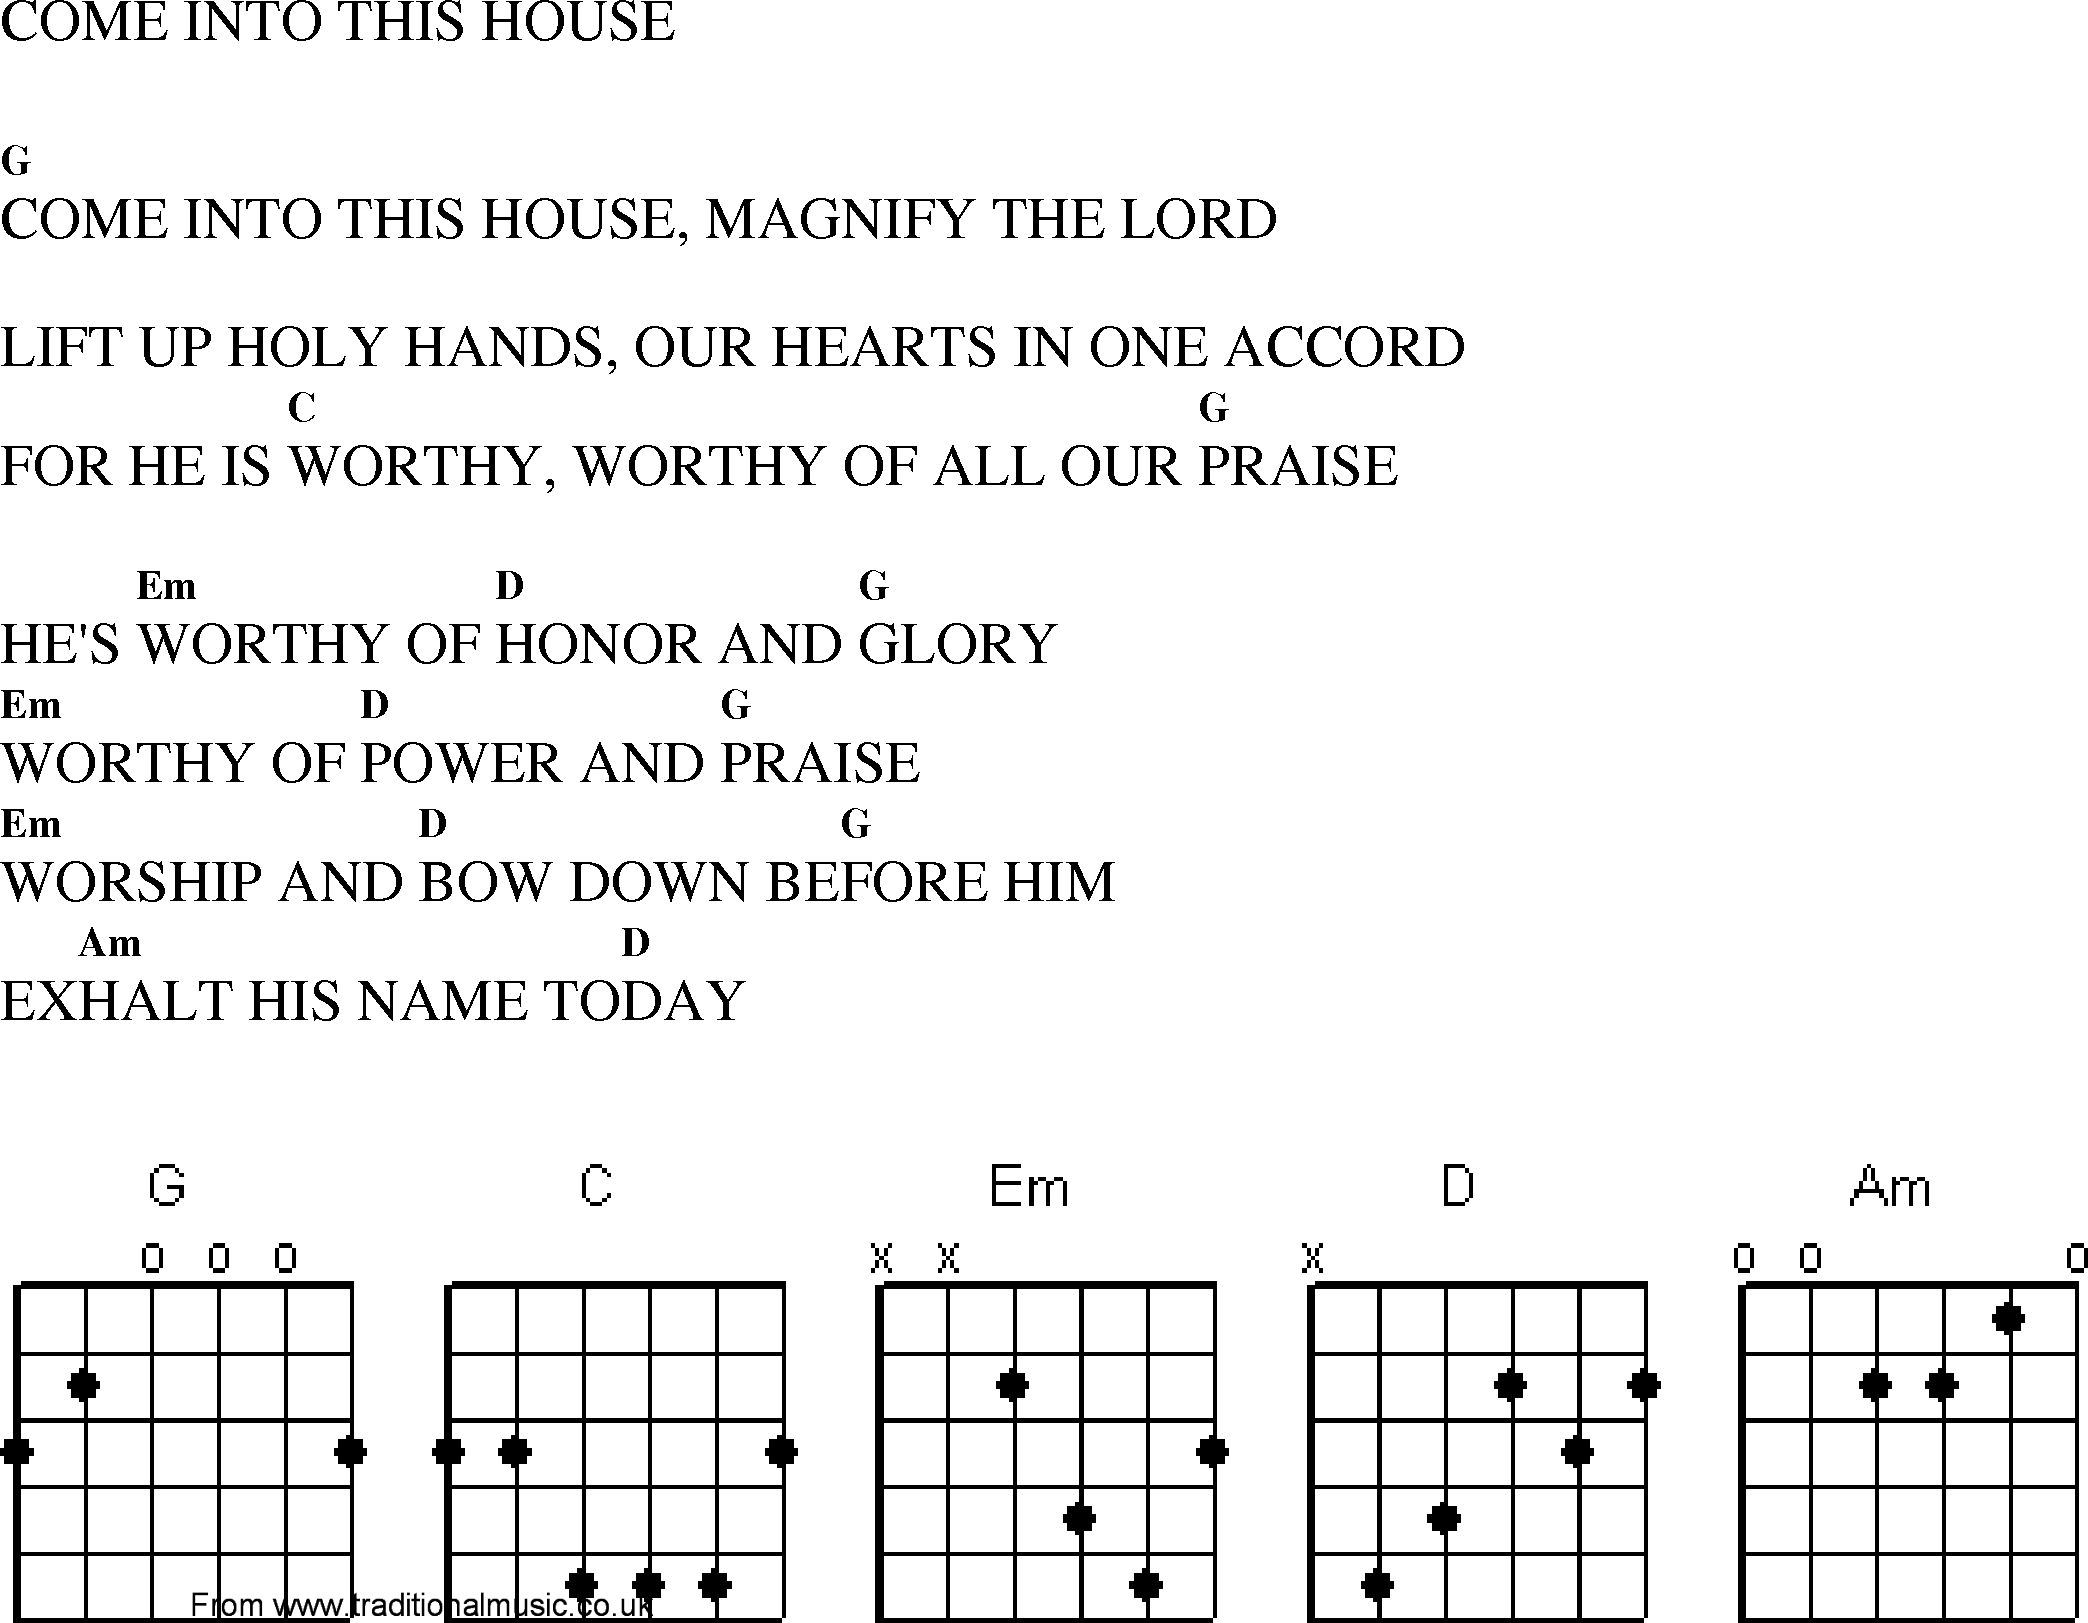 Gospel Song: come_into_this_house, lyrics and chords.